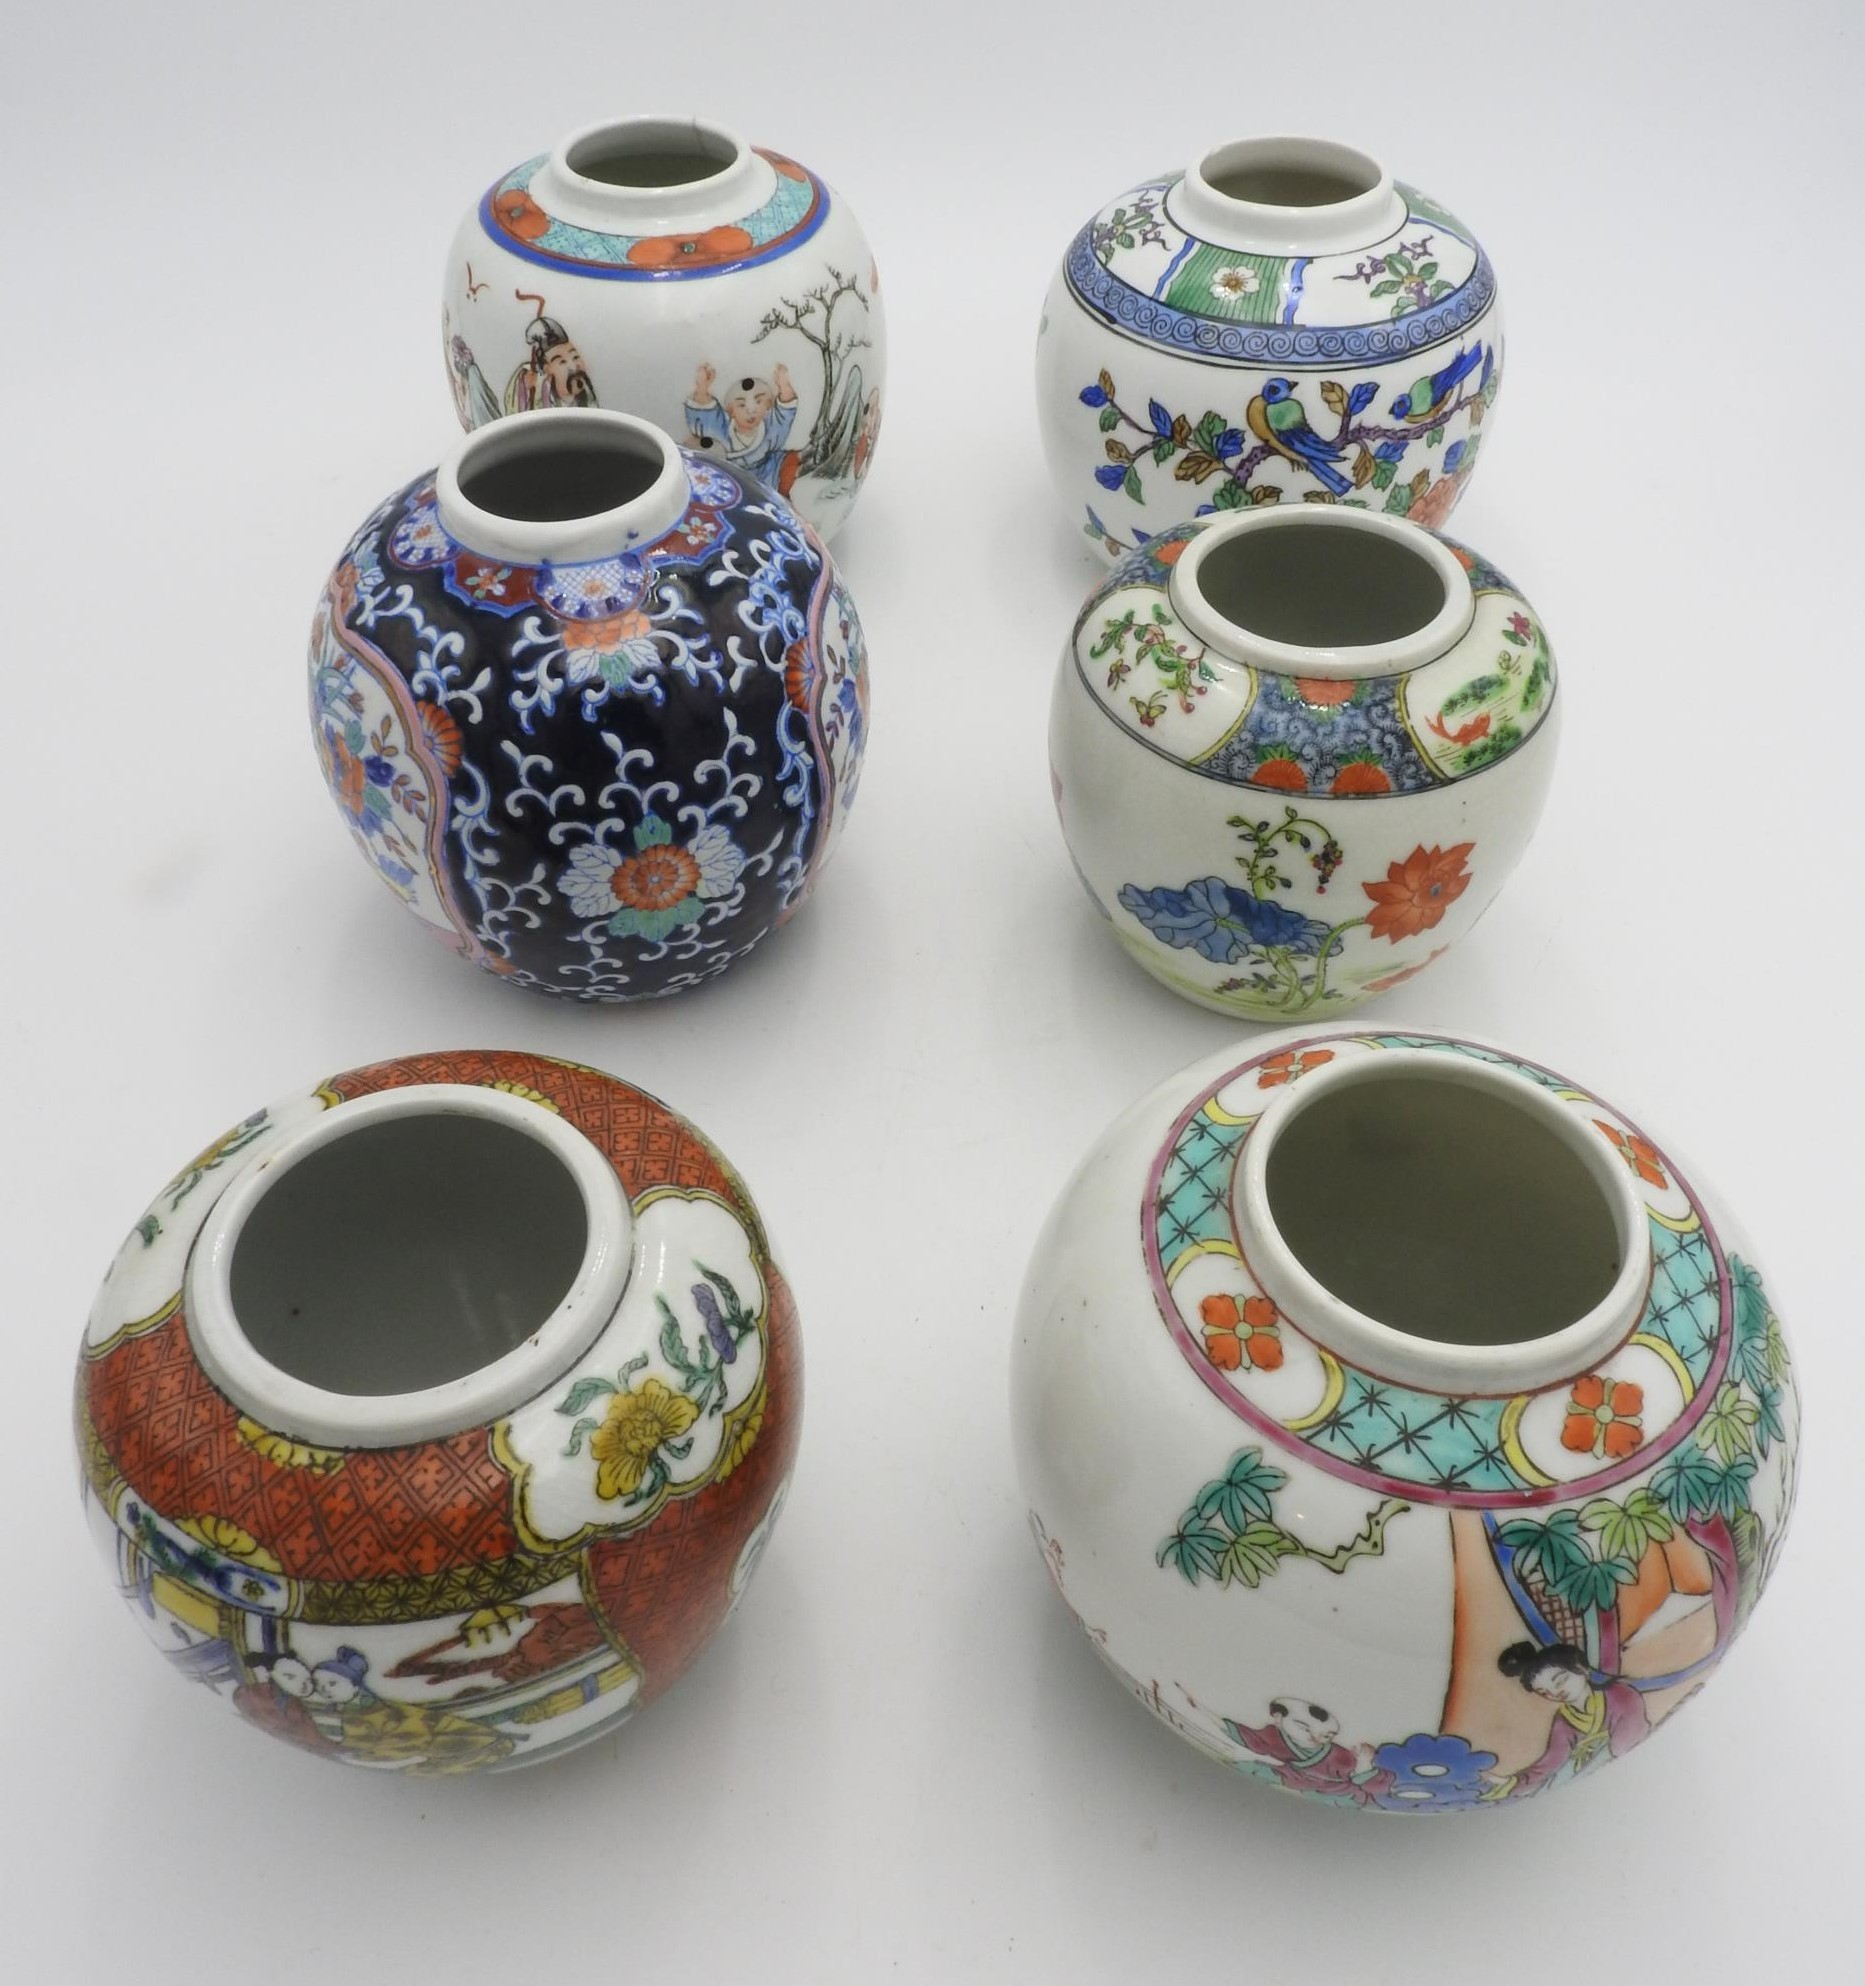 A SELECTION OF SIX 20TH CENTURY CHINESE GINGER JARS, the tallest measuring 13 cm high